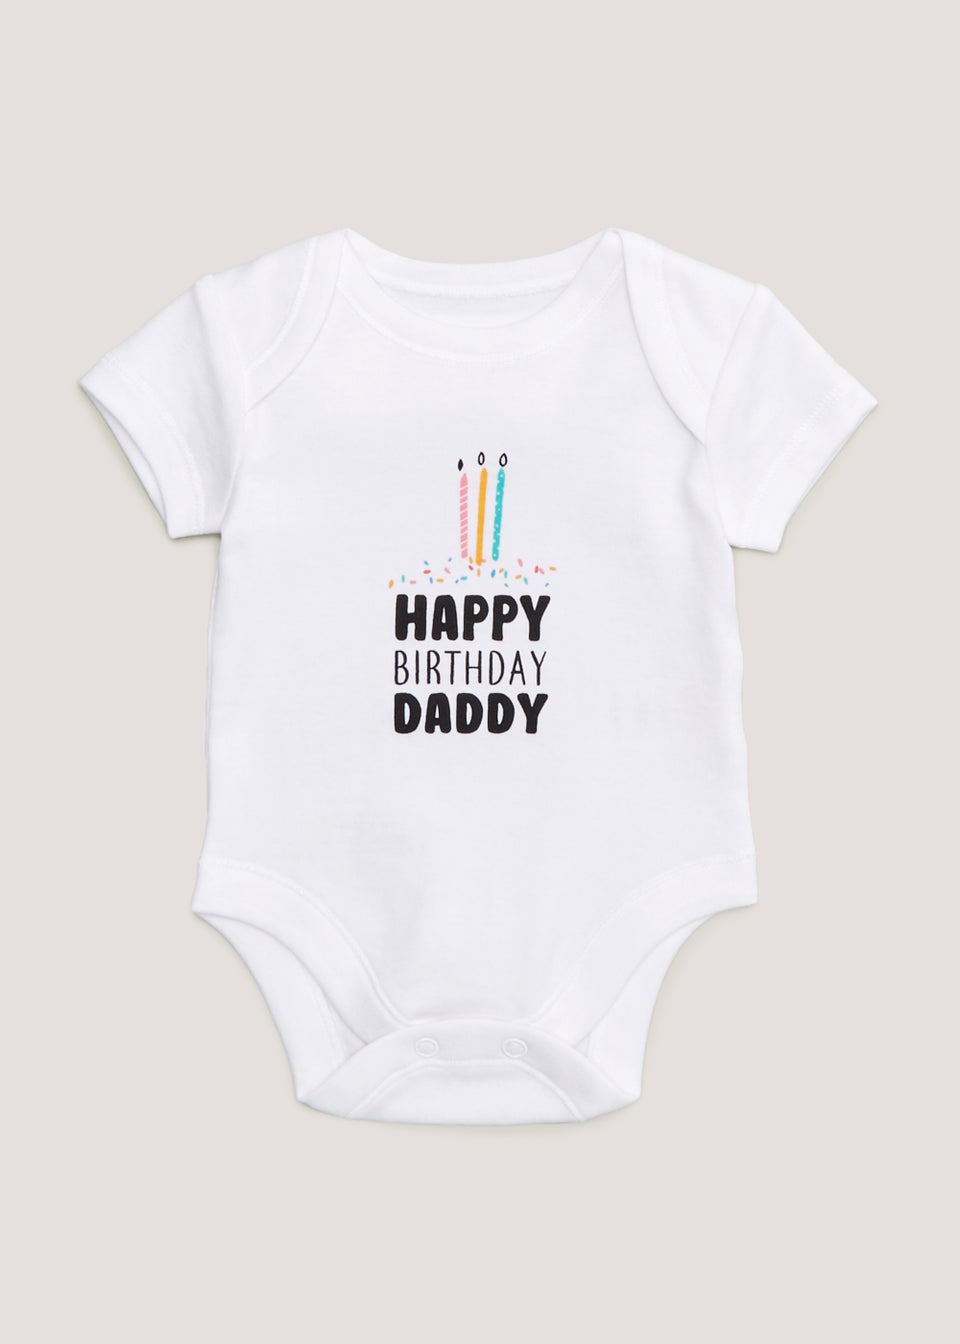 Боди Baby White Happy Birthday Daddy (Tiny Baby, 12 мес.), белый happy birthday daddy baby bodysuit birthday baby jumpsuit happy birthday dad baby outfit birthday gift for daddy